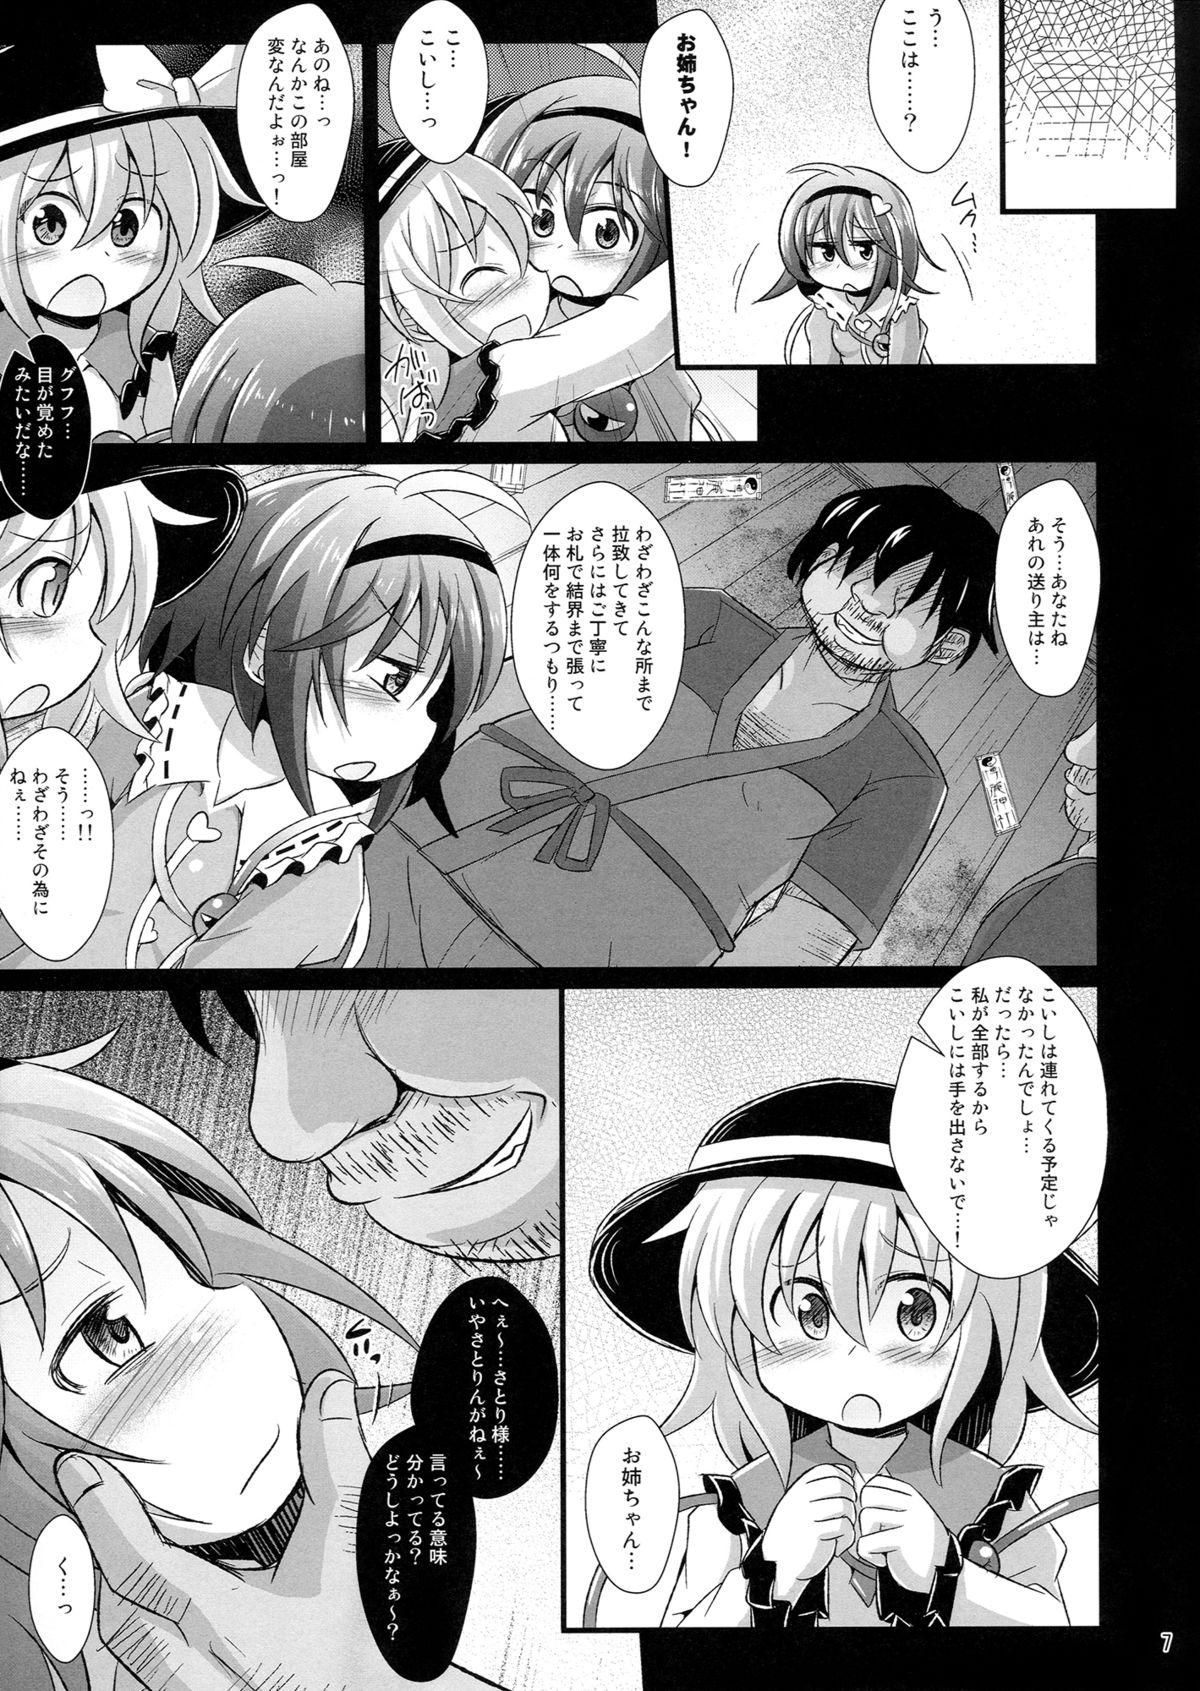 Negao Immoral Desire - Touhou project Ebony - Page 6